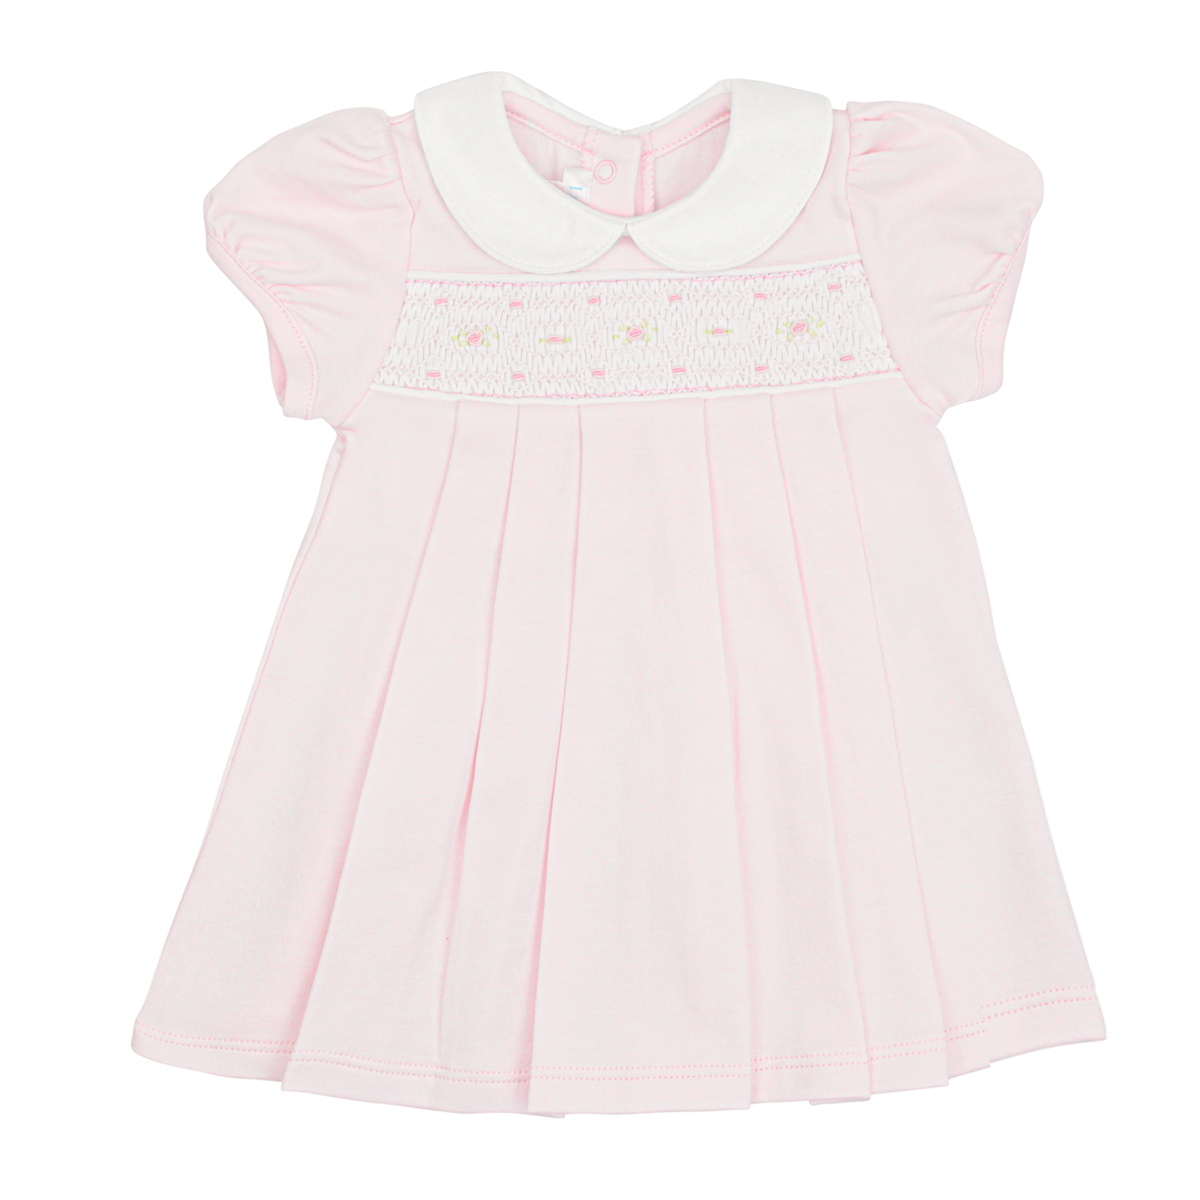 Girl's Smocked Pima Dress in Light Pink by Lyda Baby